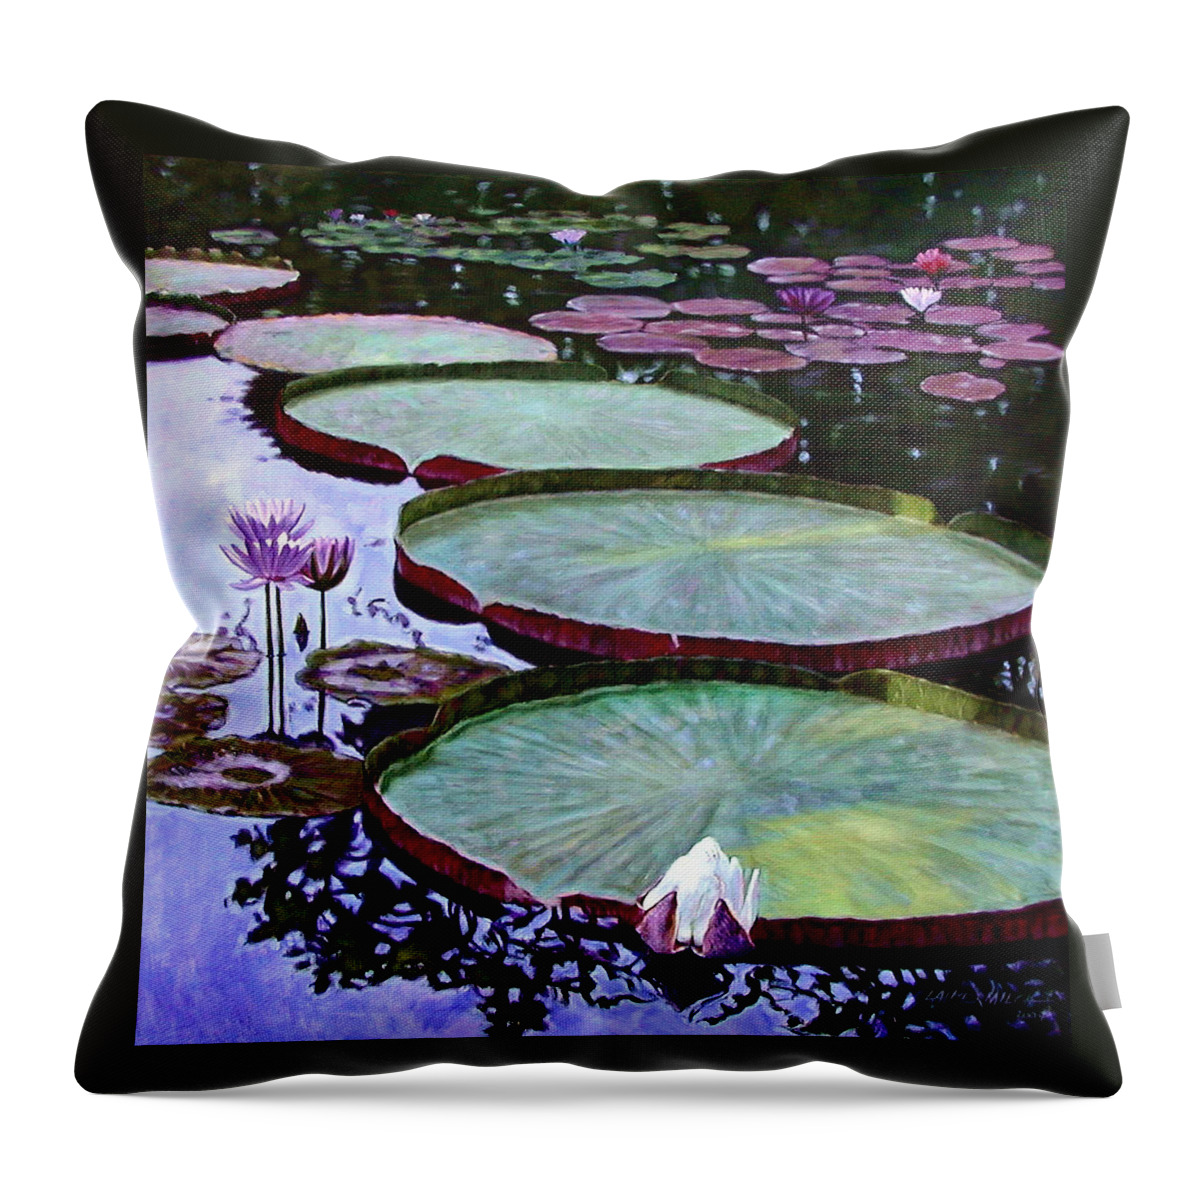 Botanical Throw Pillow featuring the painting Quiet Beauty by John Lautermilch